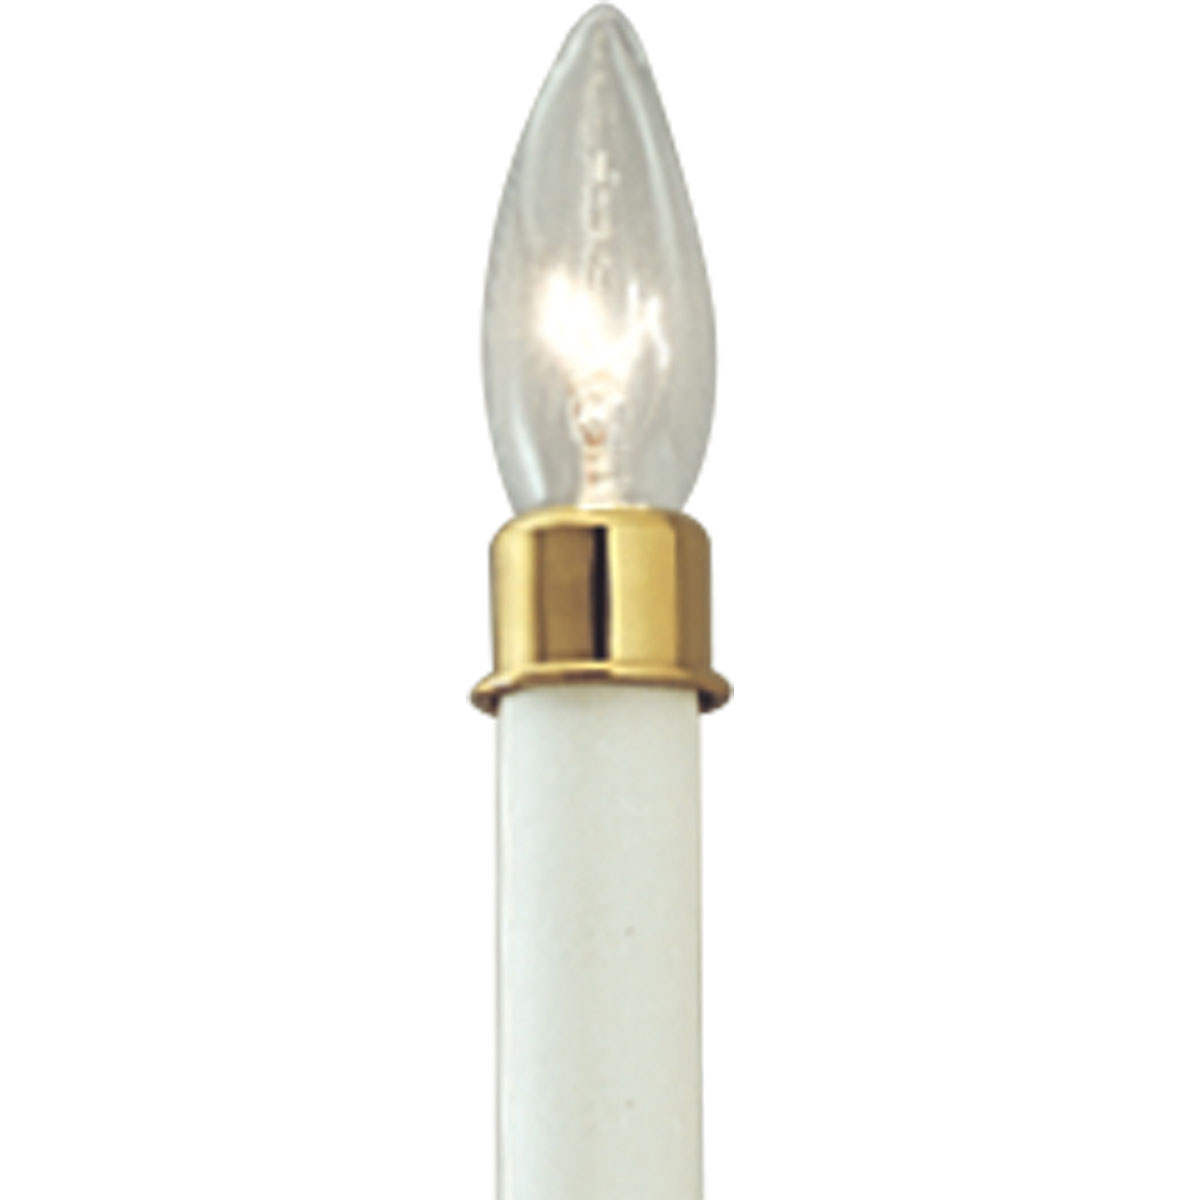 Optional polished solid brass candle-cap accessory to dress up traditional chandeliers. Fits standard lighting fixture candle sleeves available for use with candelabra-based fixtures.